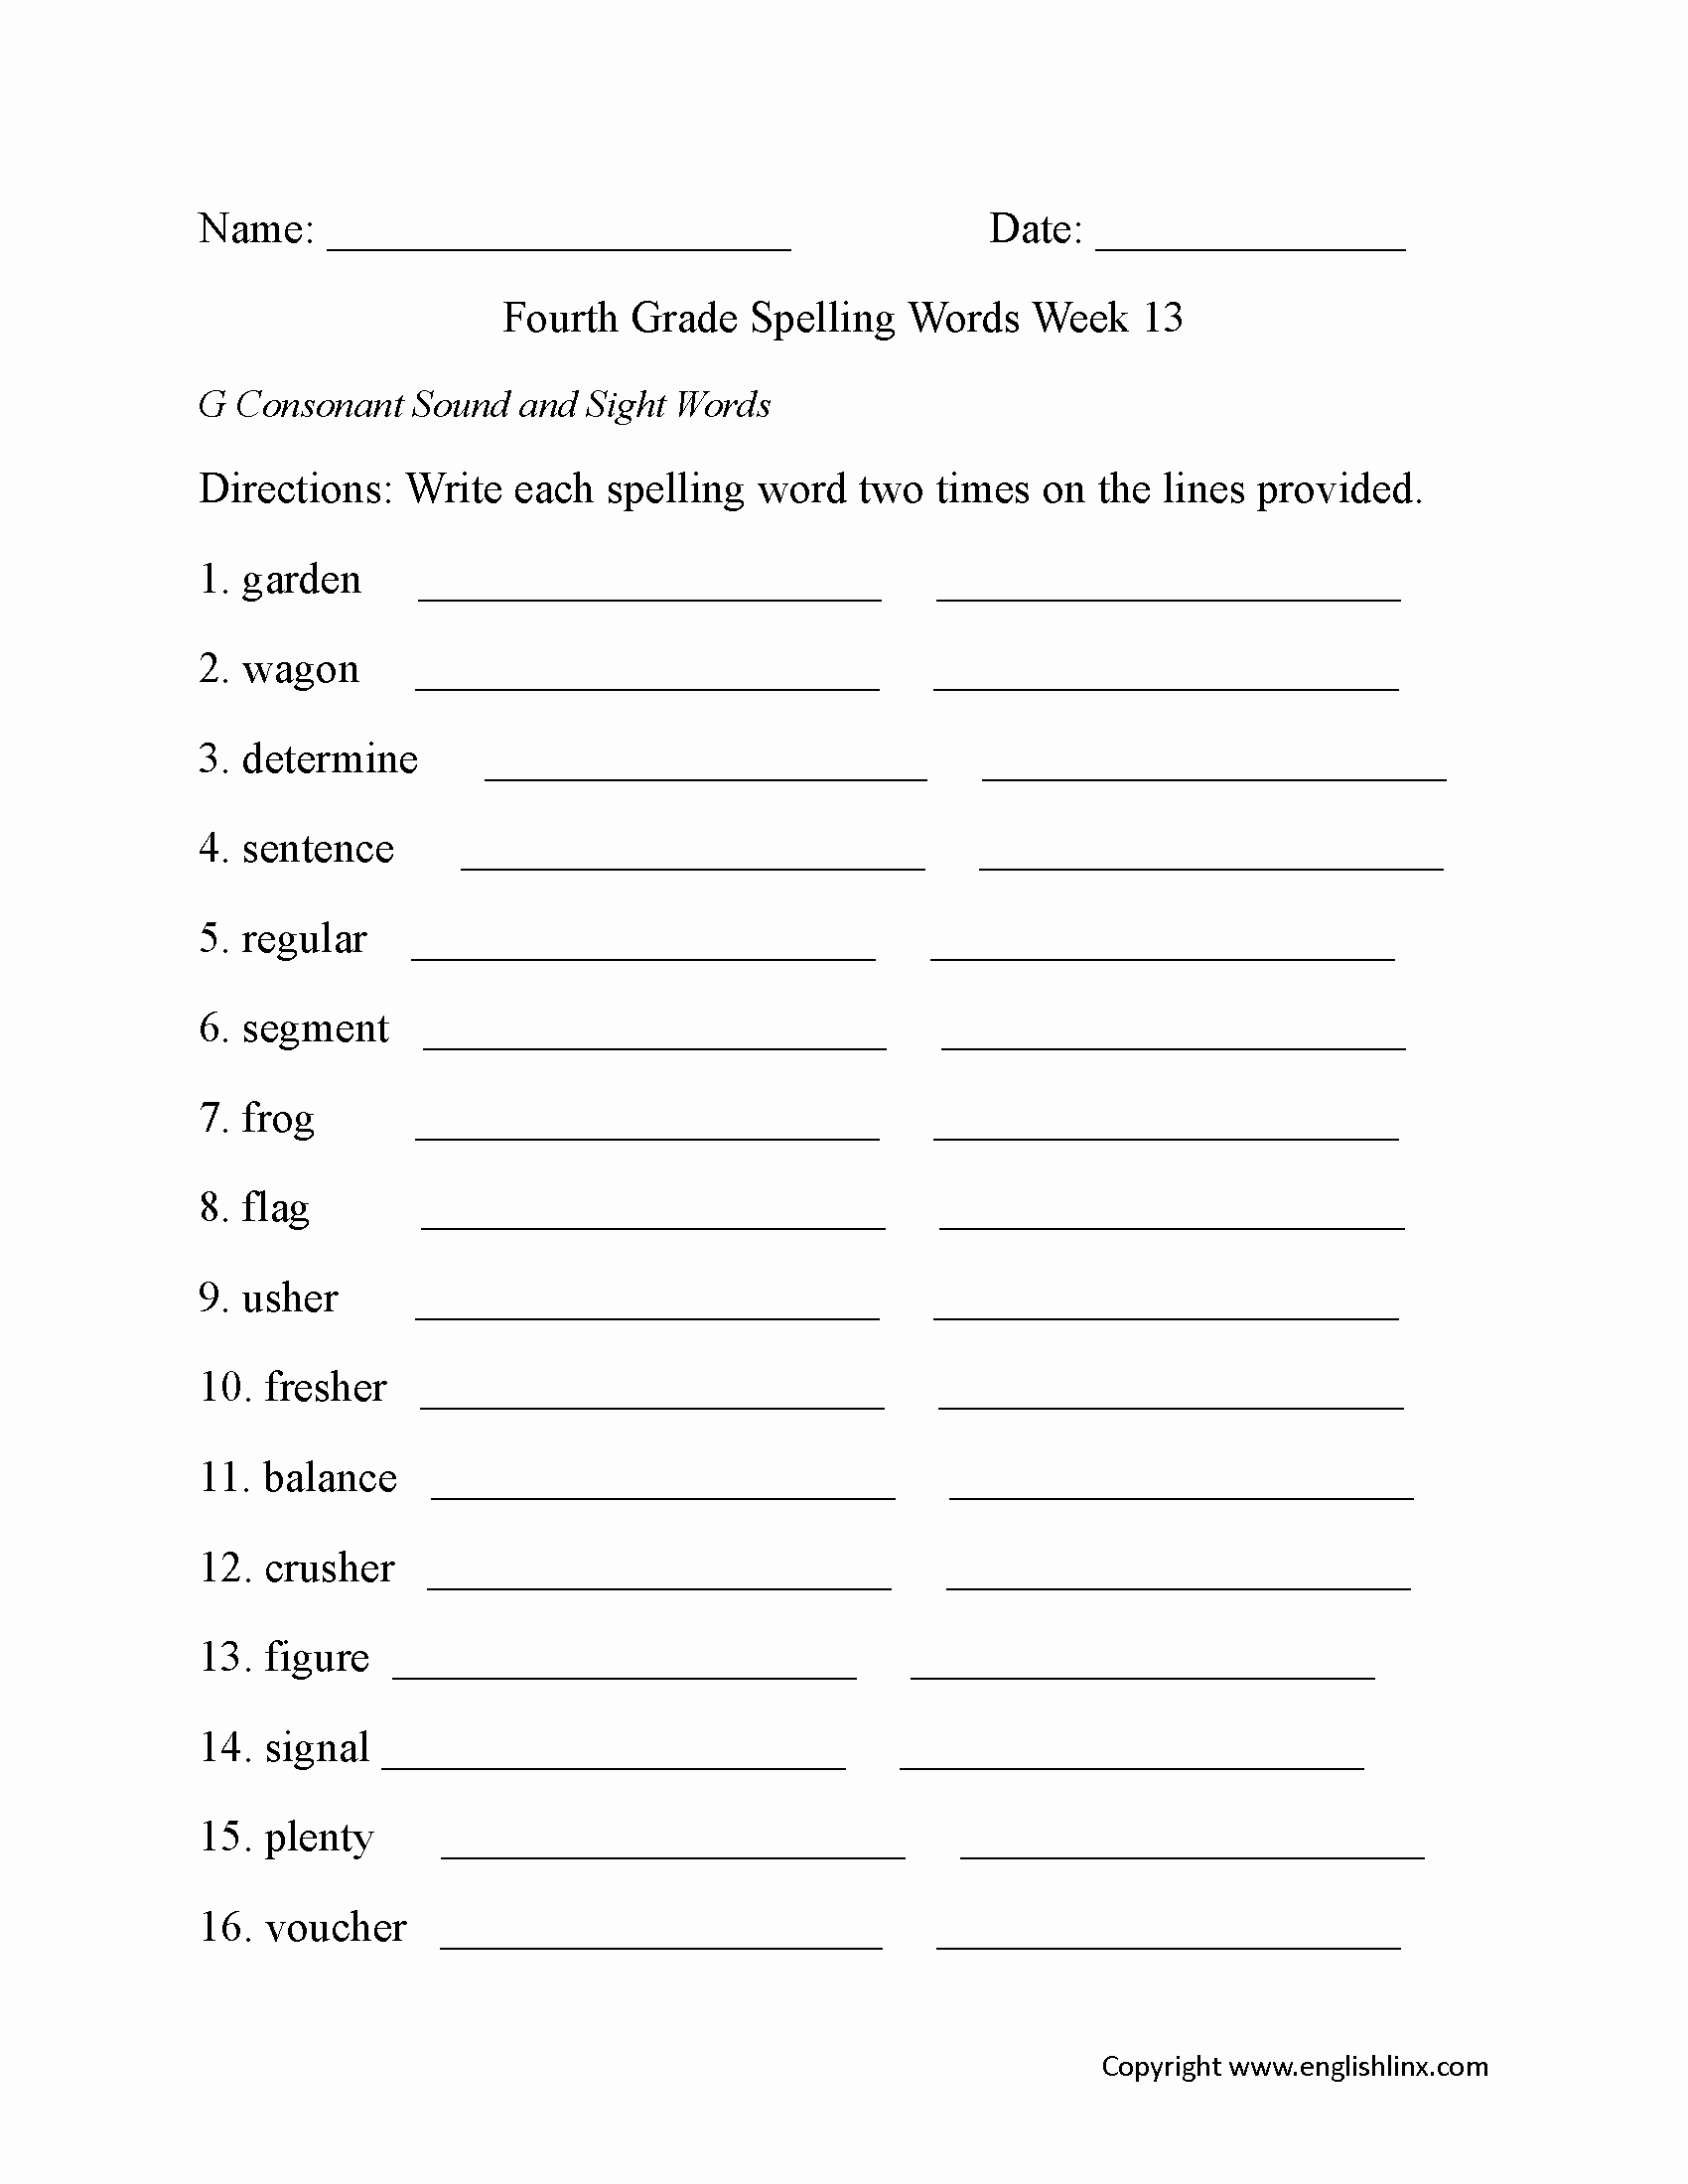 4th Grade Vocabulary Worksheets Pdf Awesome Week 13 G Consonant Fourth Grade Spelling Worksheets